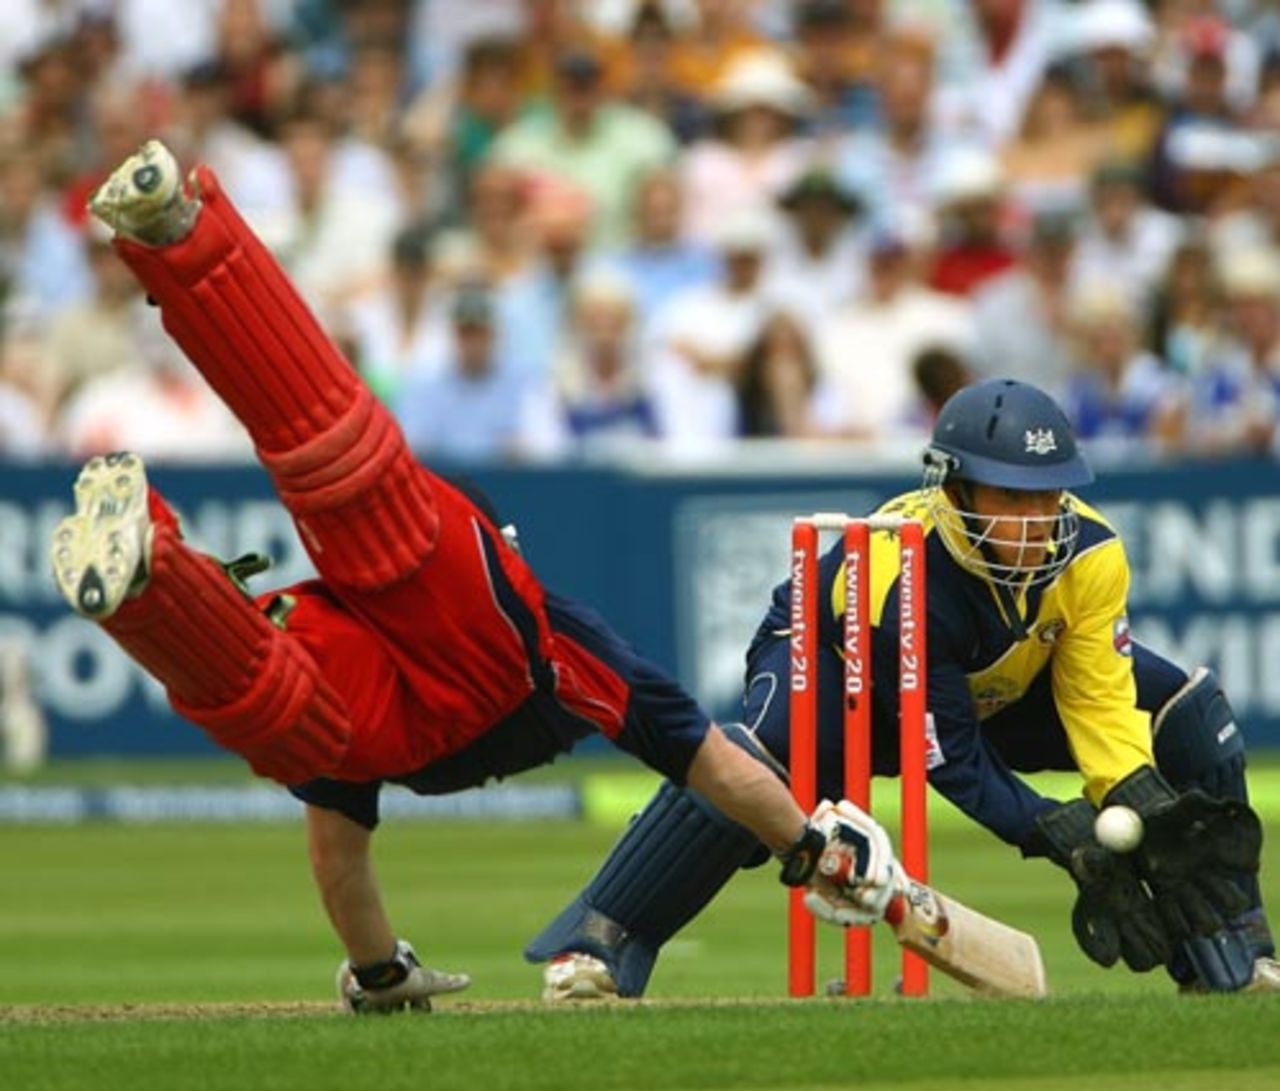 Gareth Cross' acrobatics pay off as he just manages to ground his bat, Gloucestershire v Lancashire, Twenty20 Cup, 1st semi-final, Edgbaston, August 4, 2007 